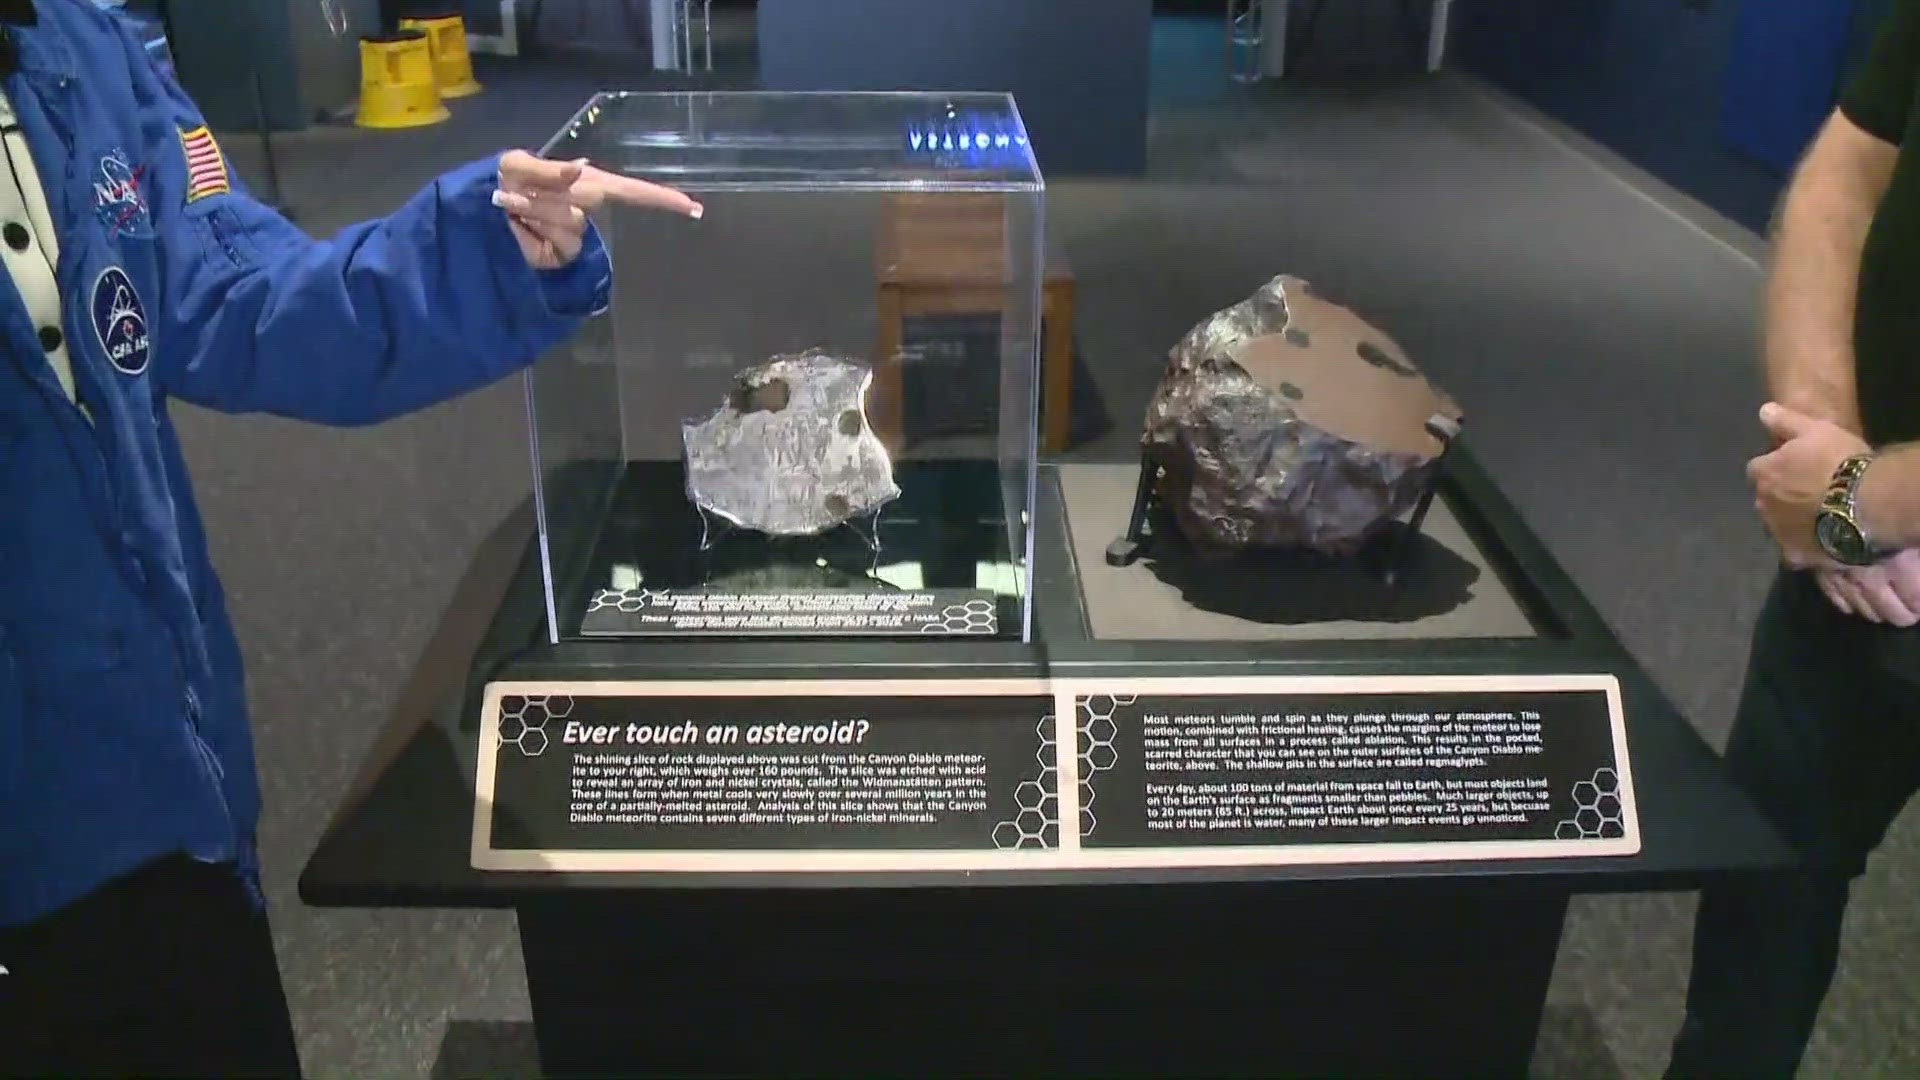 Museum-goers can even tough real asteroids.